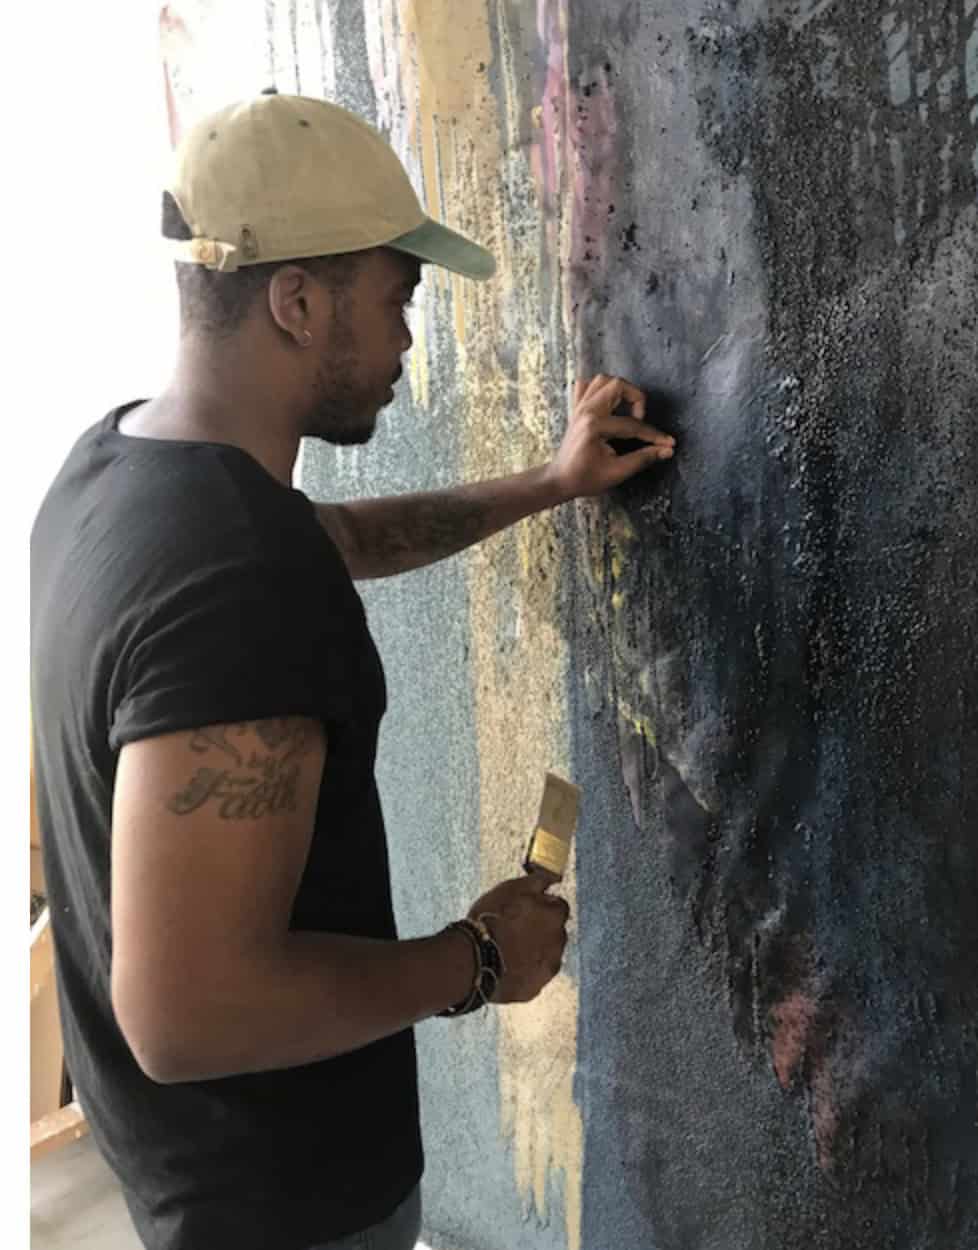 Abstract painter Patrick Eugène works on a canvas as a James Weldon Jonson artist fellow at Bard College at Simon's Rock. Press photo courtesy of the college